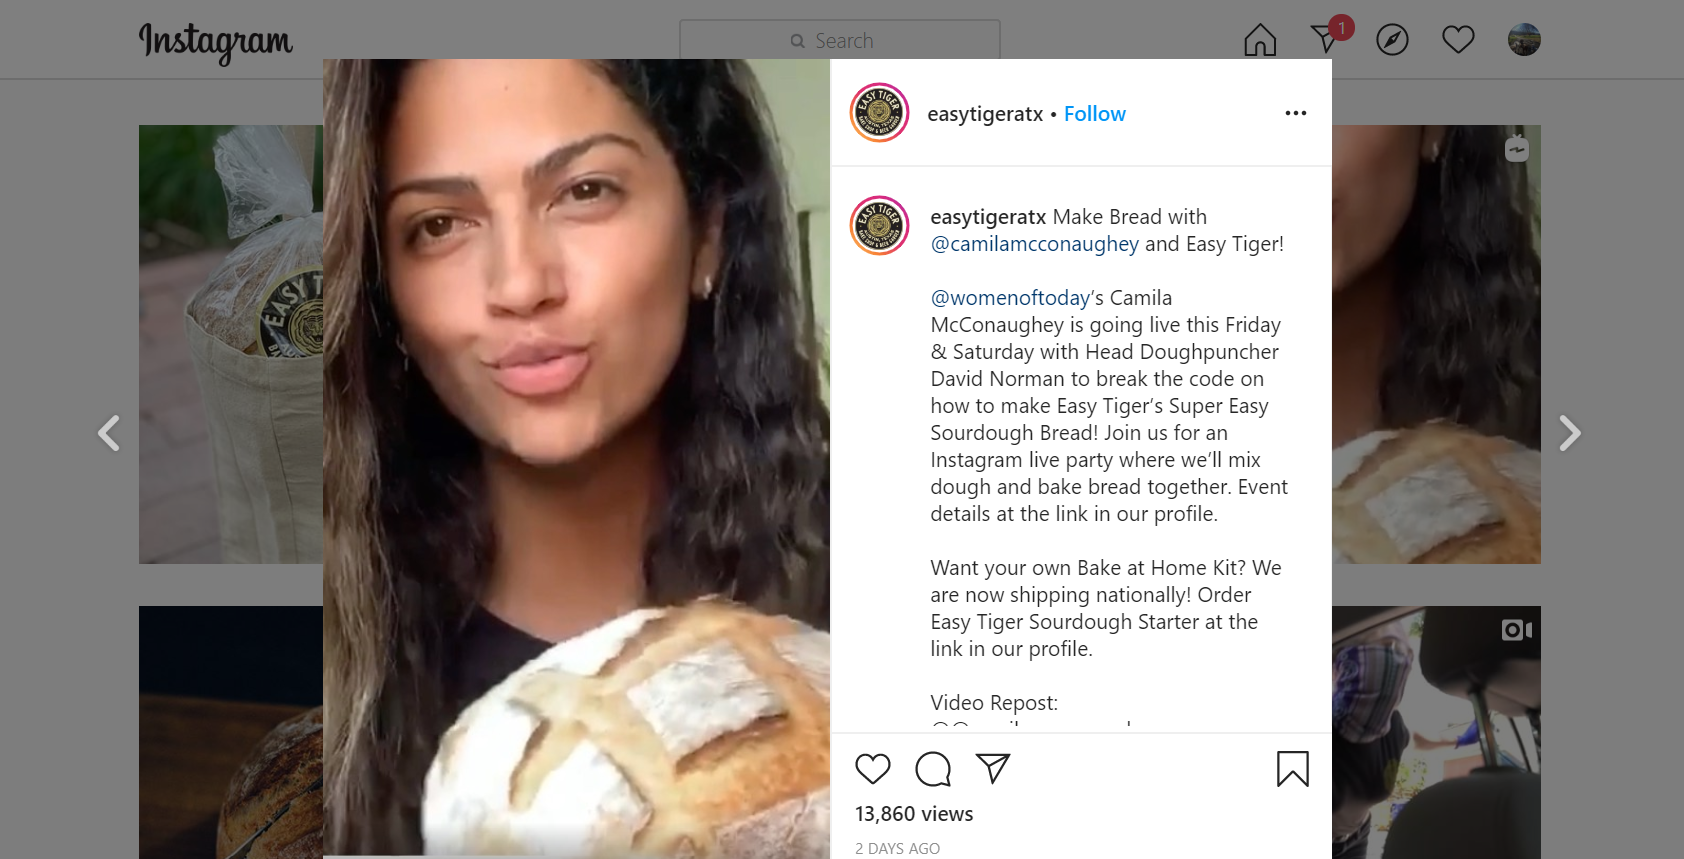 An-Instagram-post-showing-a-still-from-a-video-of-Camila-McConaughey-baking-Easy-Tiger’s-sourdough-bread